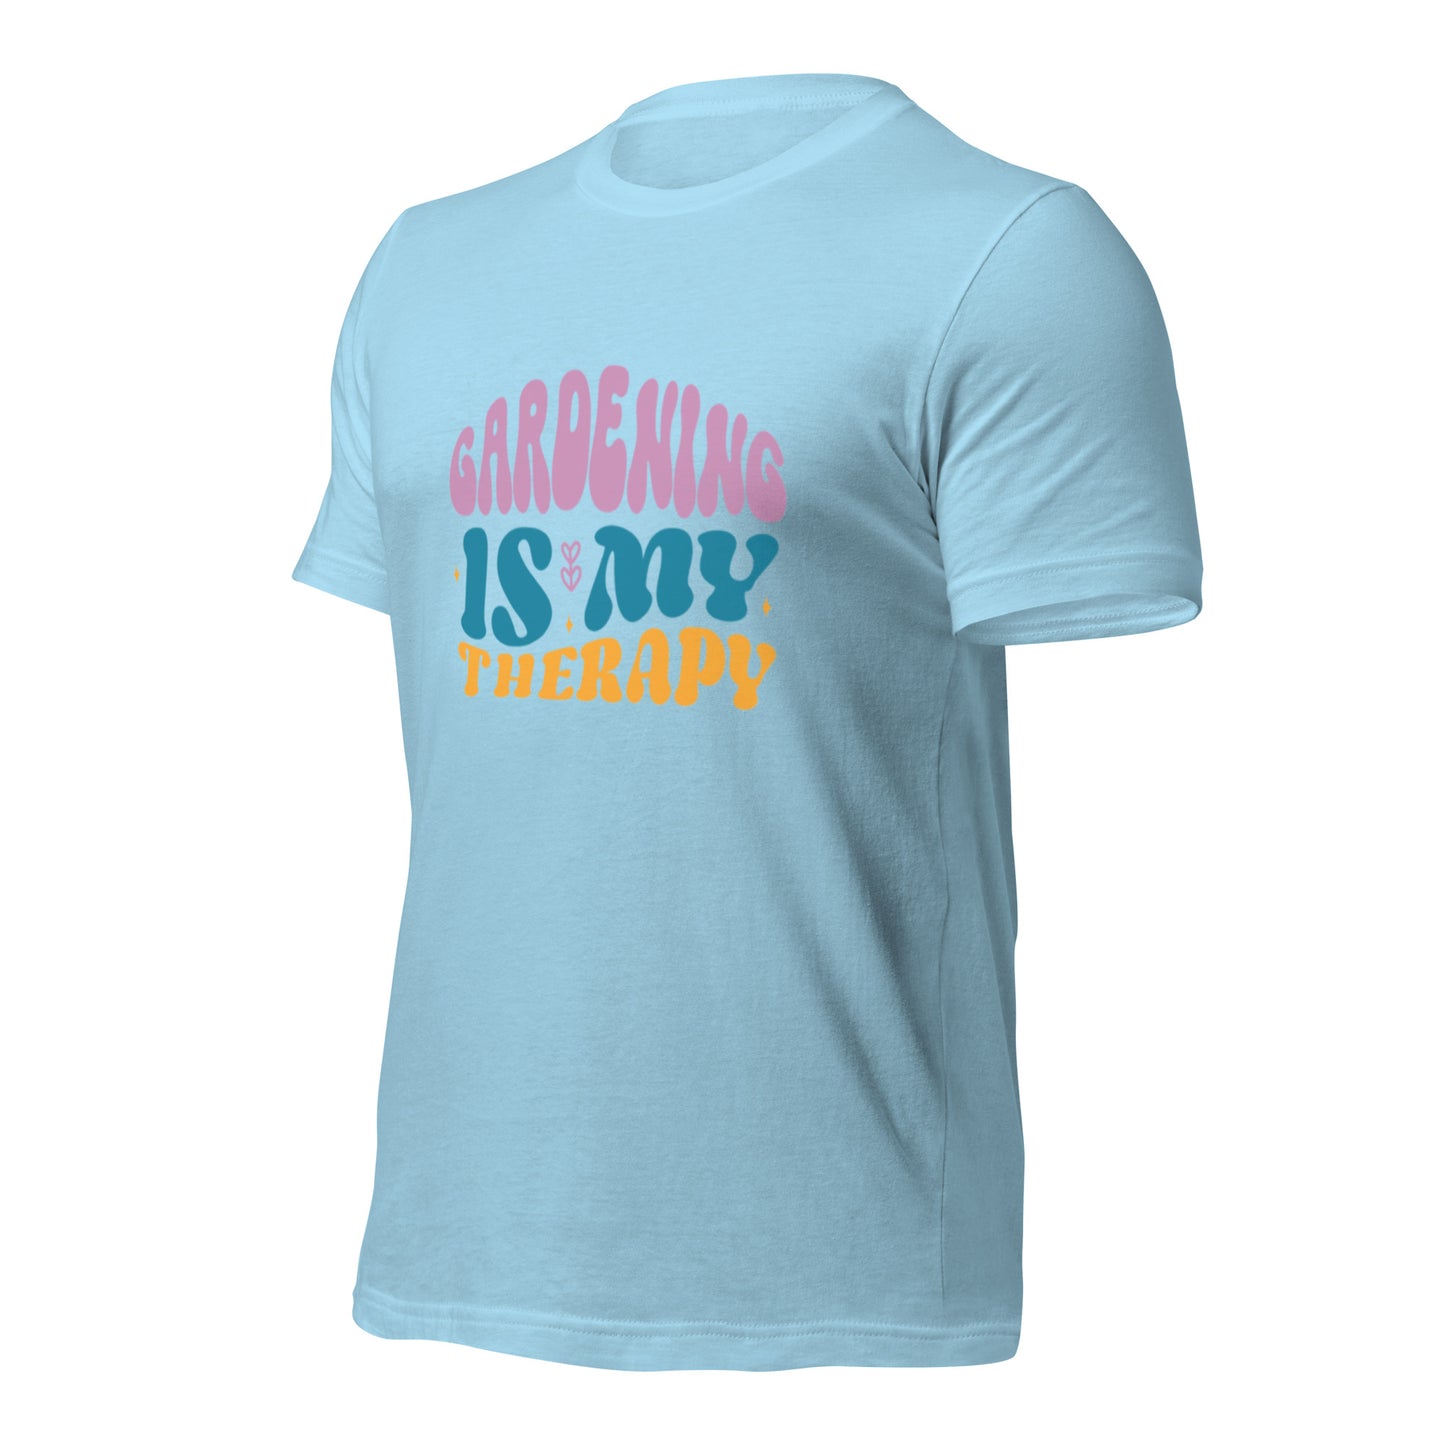 Gardening is my therapy t-shirt